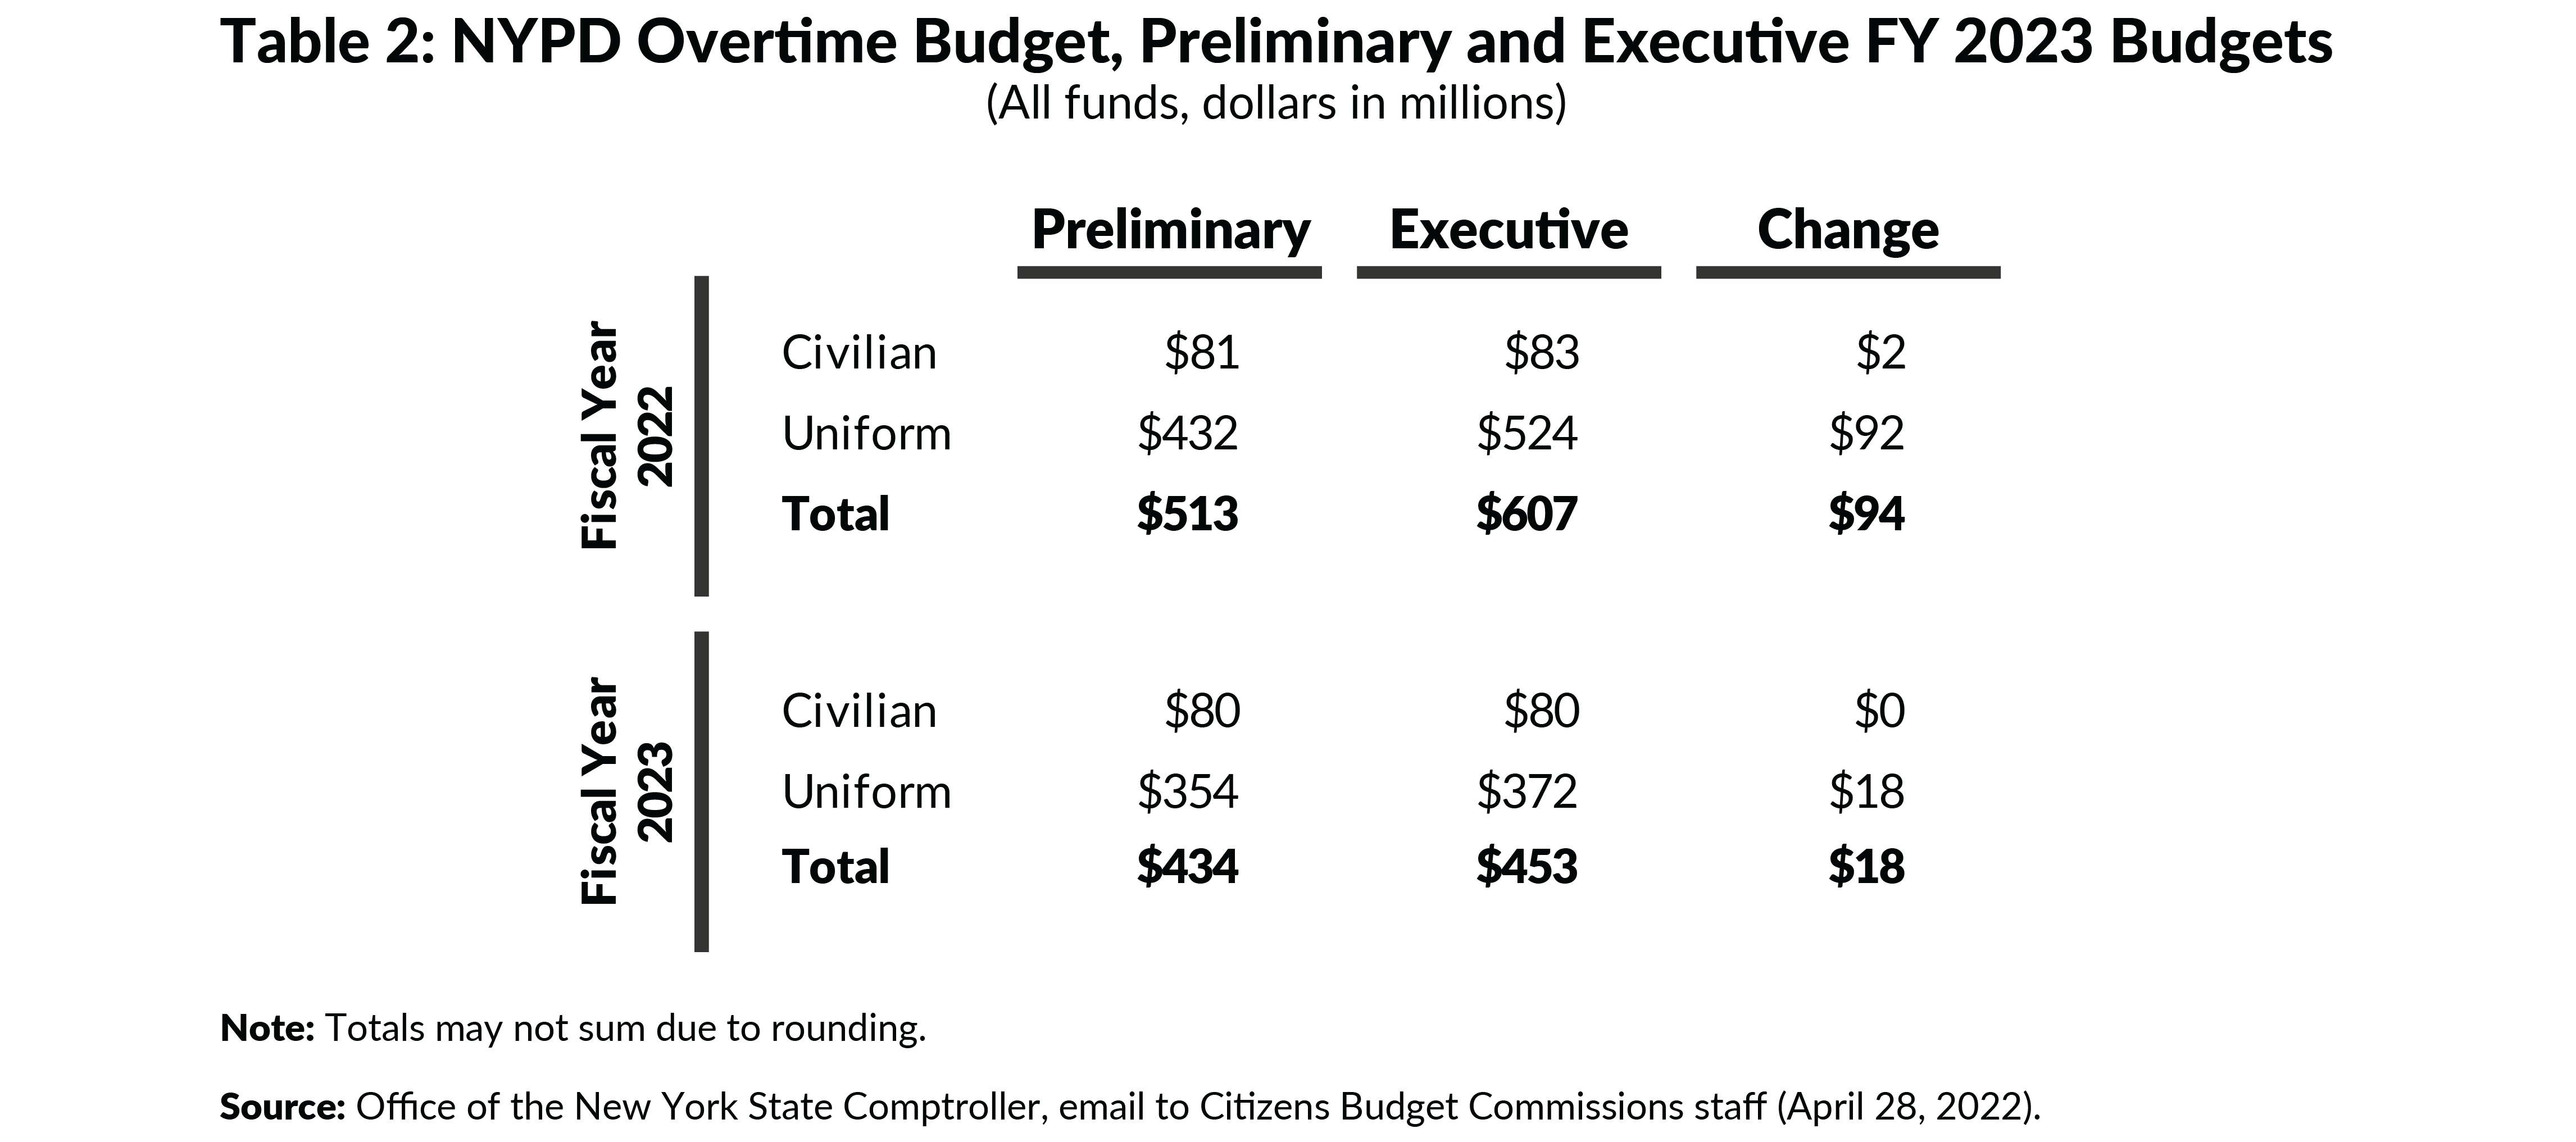 Table 2. NYPD Overtime Budget, Preliminary and Executive FY 2023 Budgets (All funds, dollars in millions)